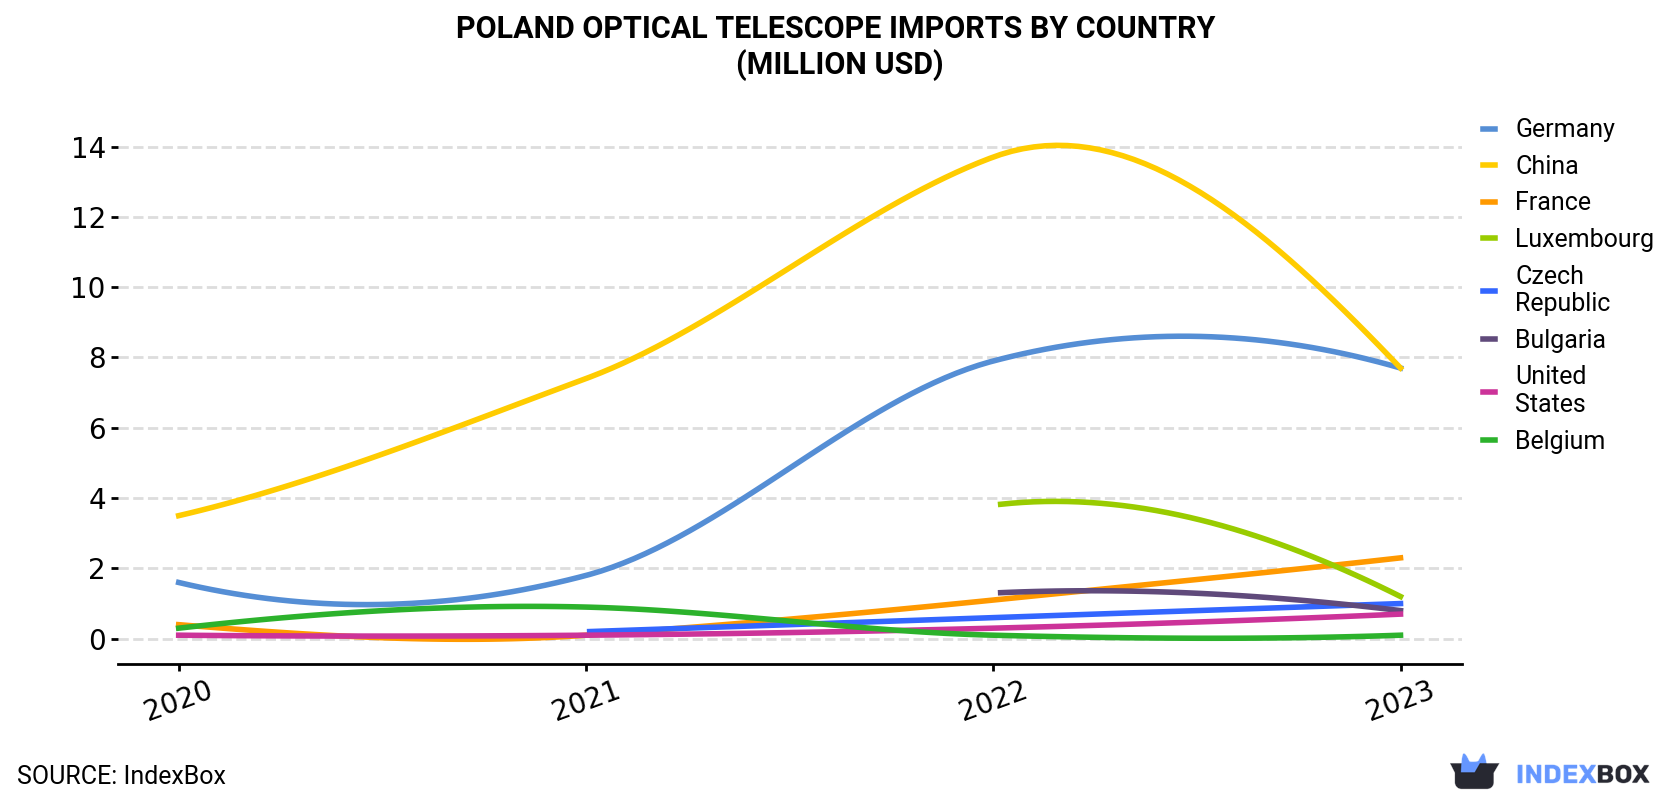 Poland Optical Telescope Imports By Country (Million USD)